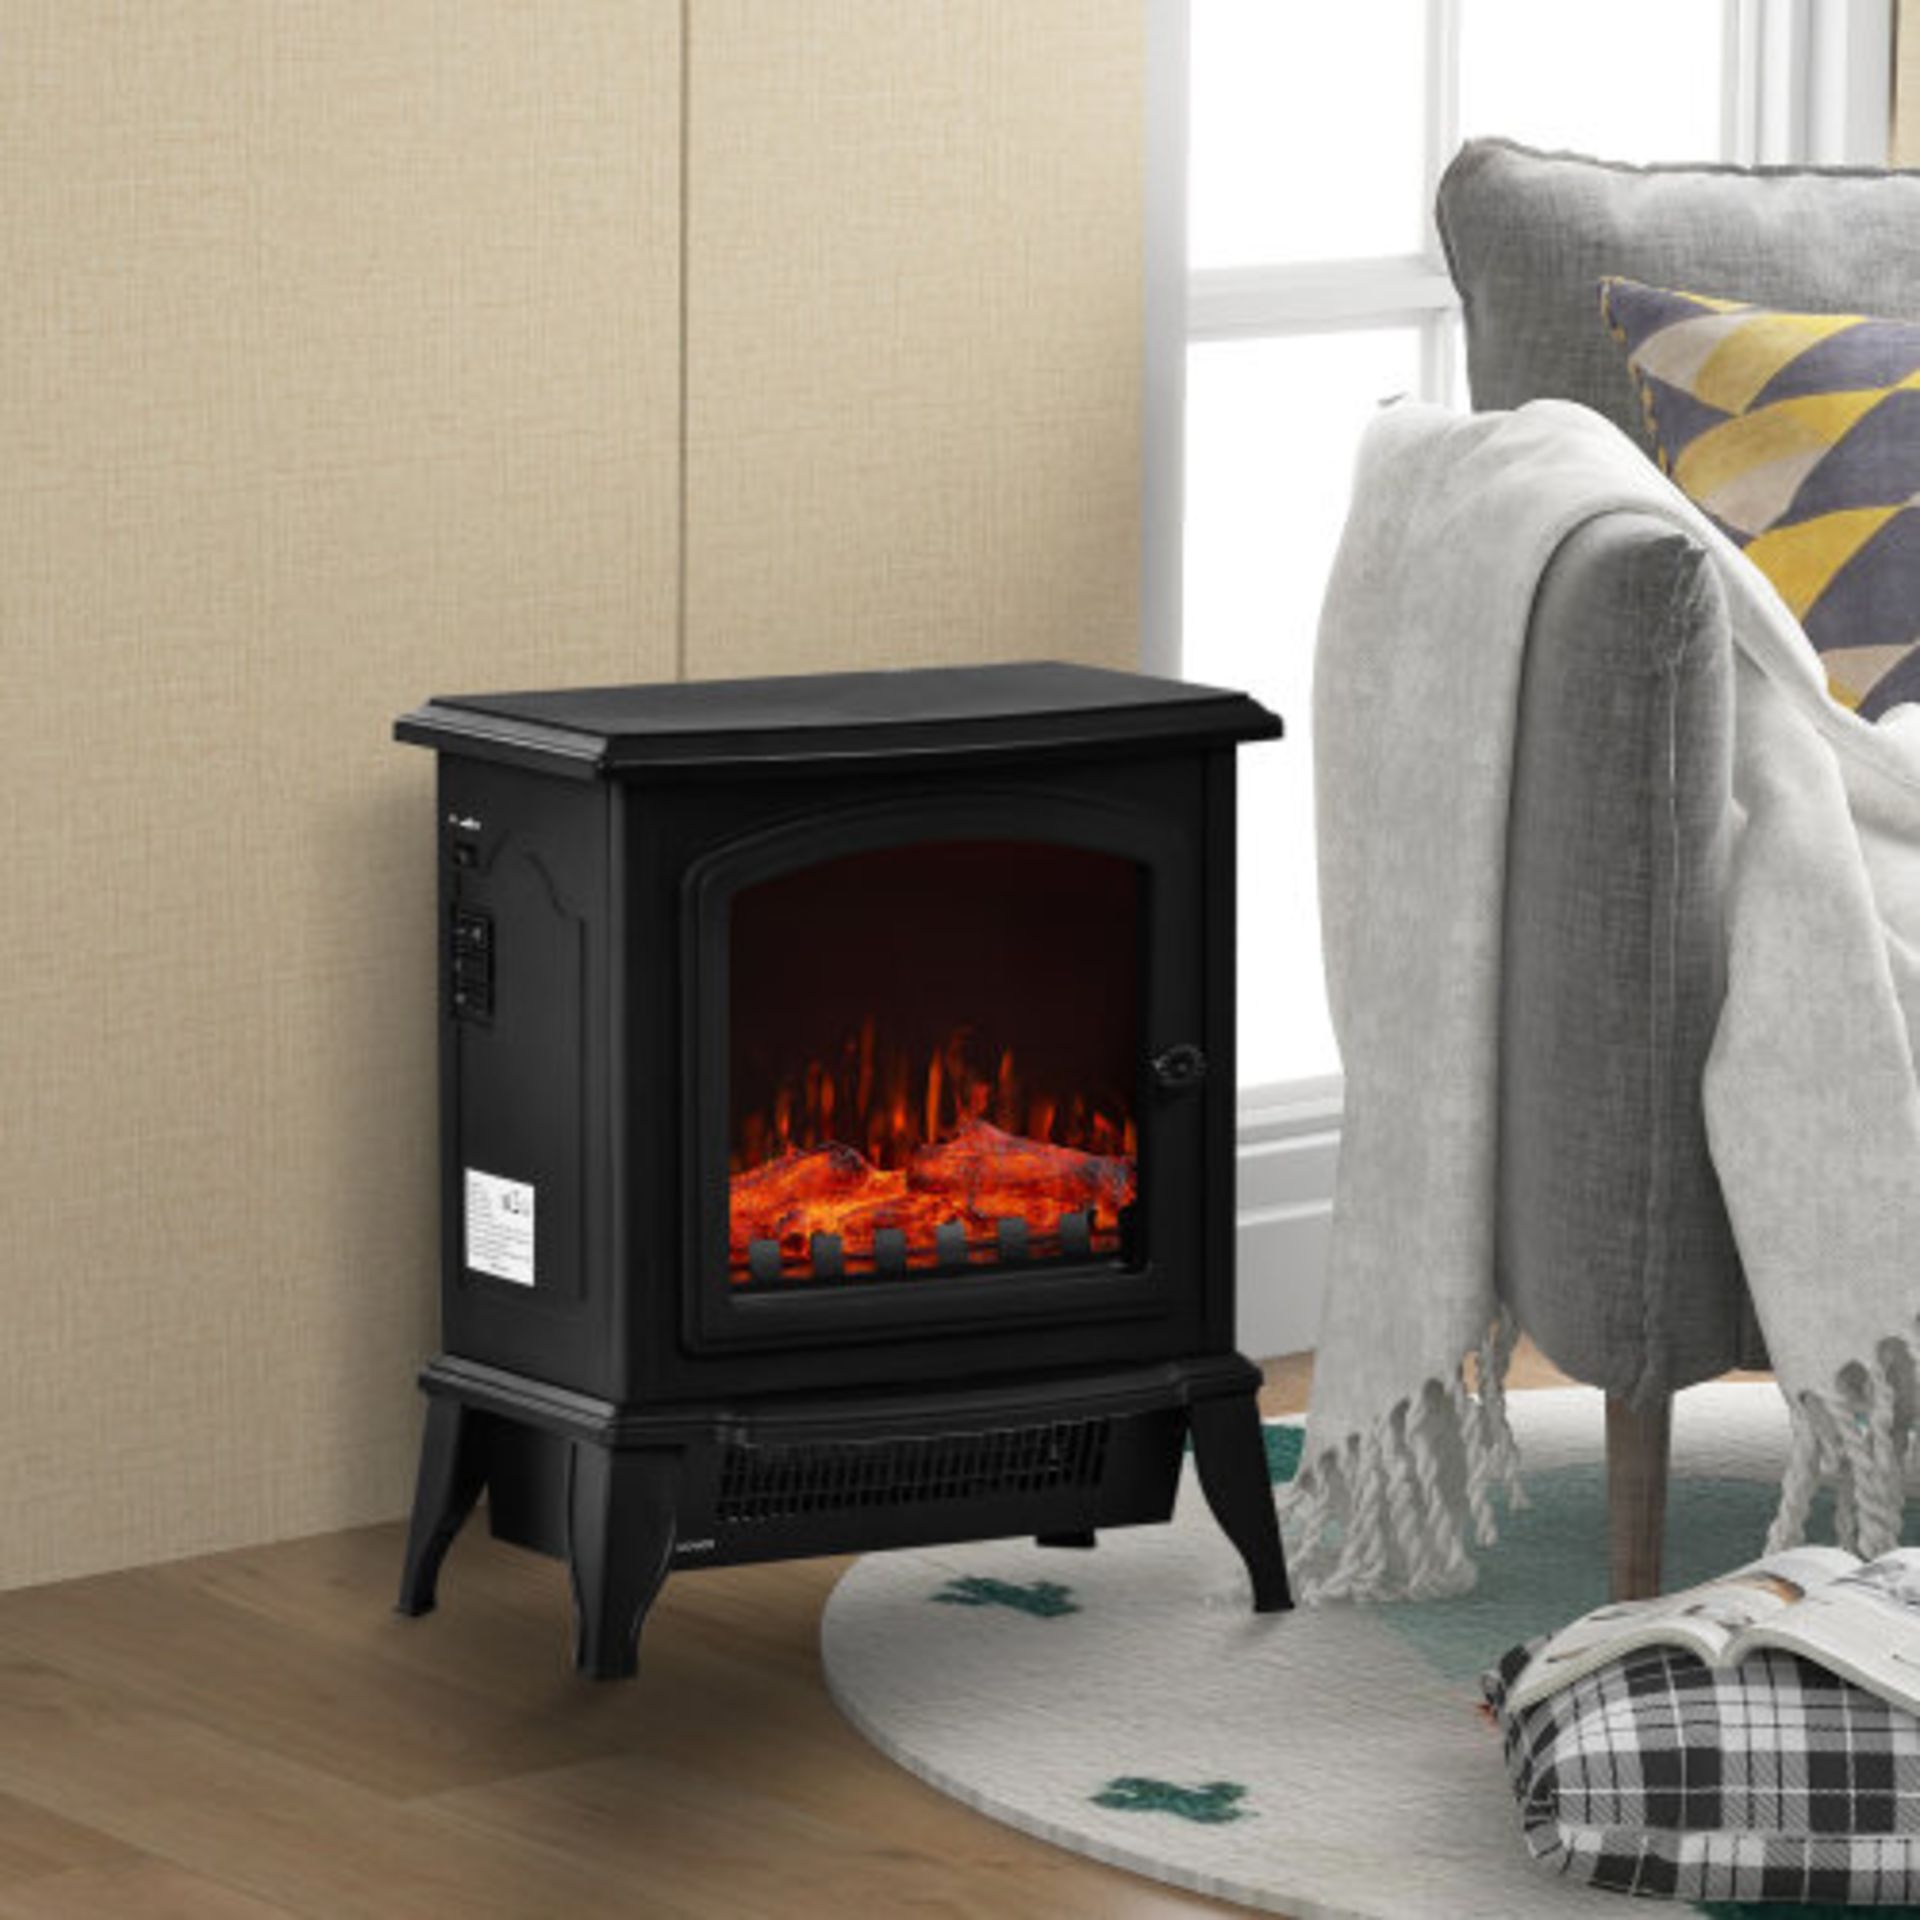 PALLET - FOCAL POINT FIREPLACES, HEATERS RADIATORS, COOKER CHIMNEY HOOD, HOB RRP OVER £2000 - Image 3 of 11